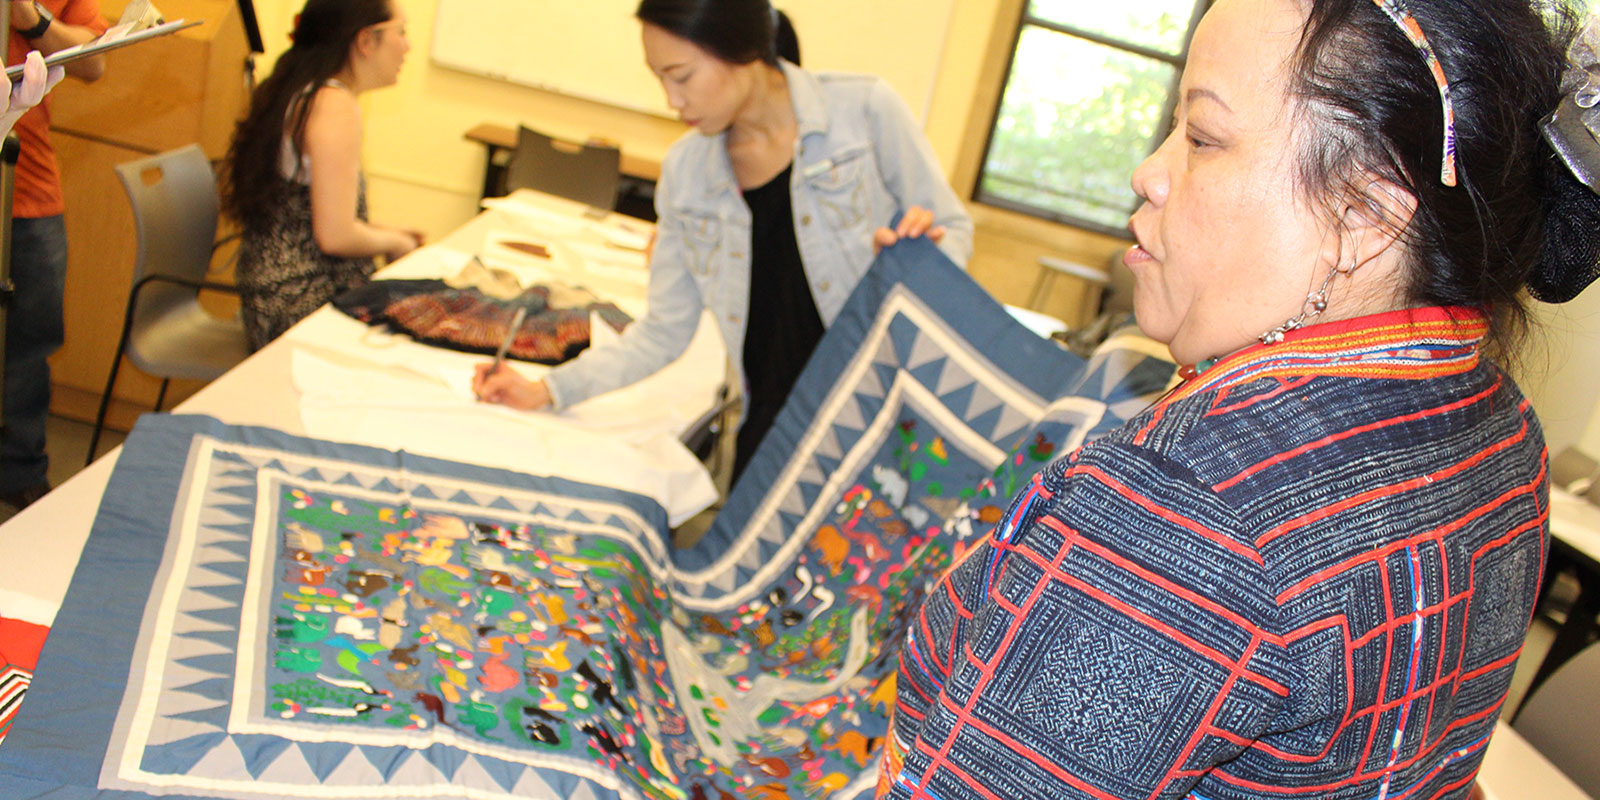 two women hold a hmong blanket while one takes notes on its details